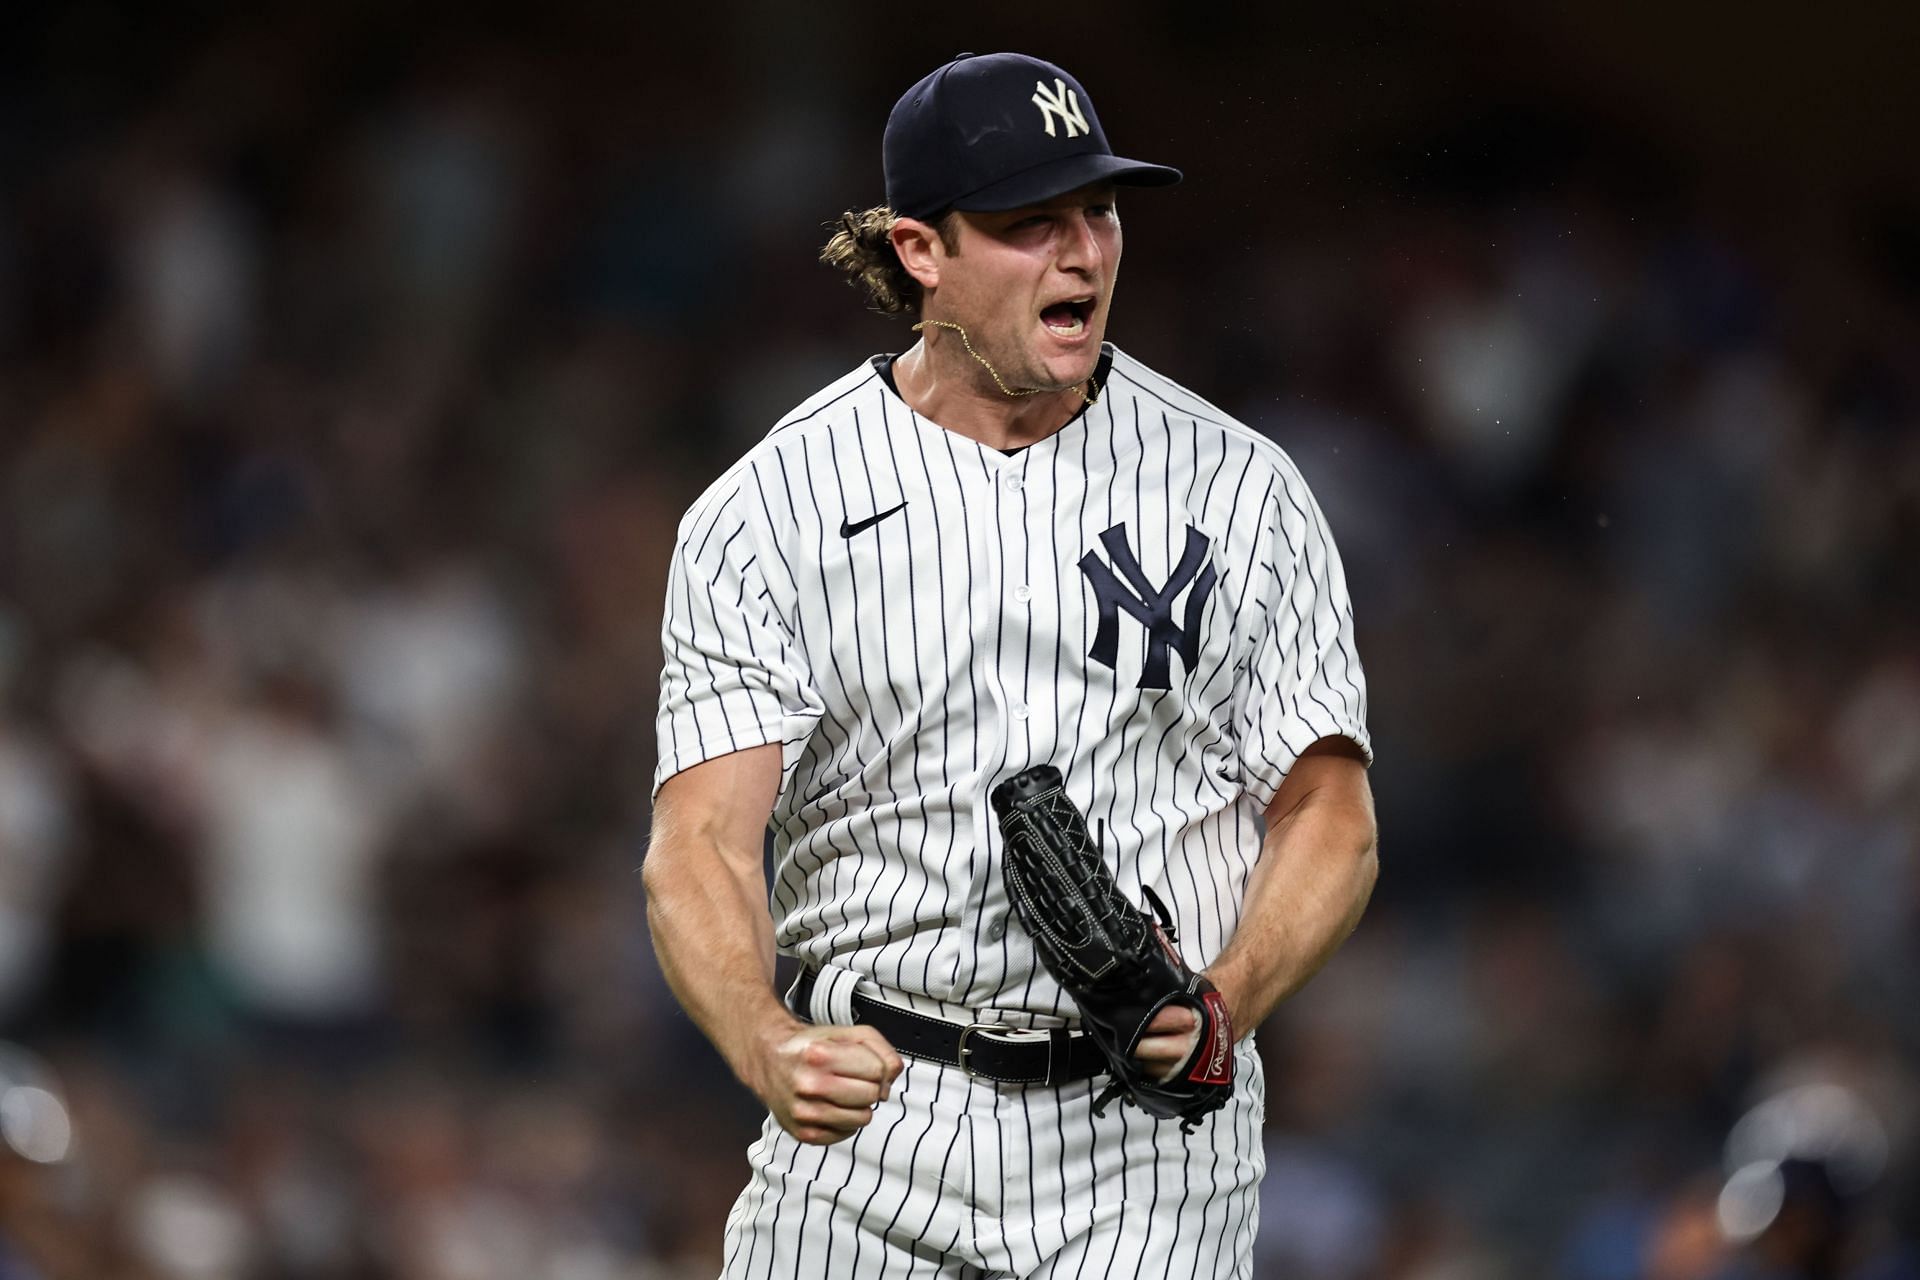 New York Yankees starting pitcher Gerrit Cole threw six innings and struck out seven batters against the Tampa Bay Rays tonight